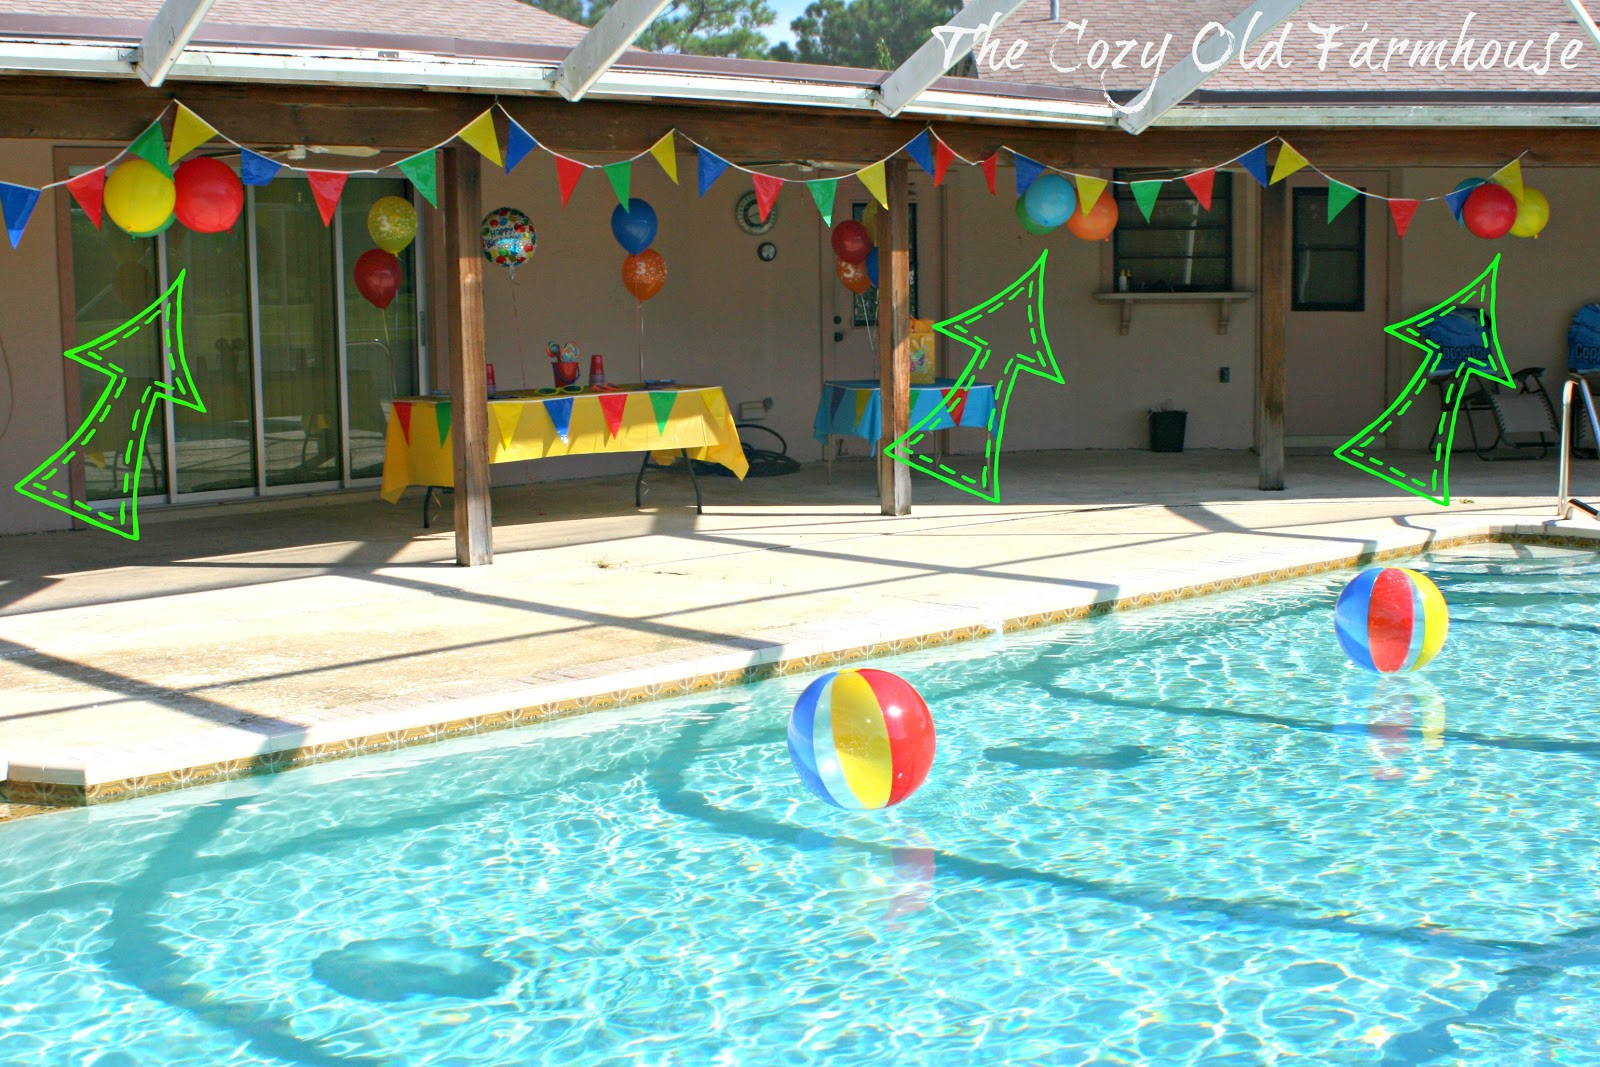 Pool Party Centerpieces Ideas
 The Cozy Old "Farmhouse" Simple and Bud Friendly Pool